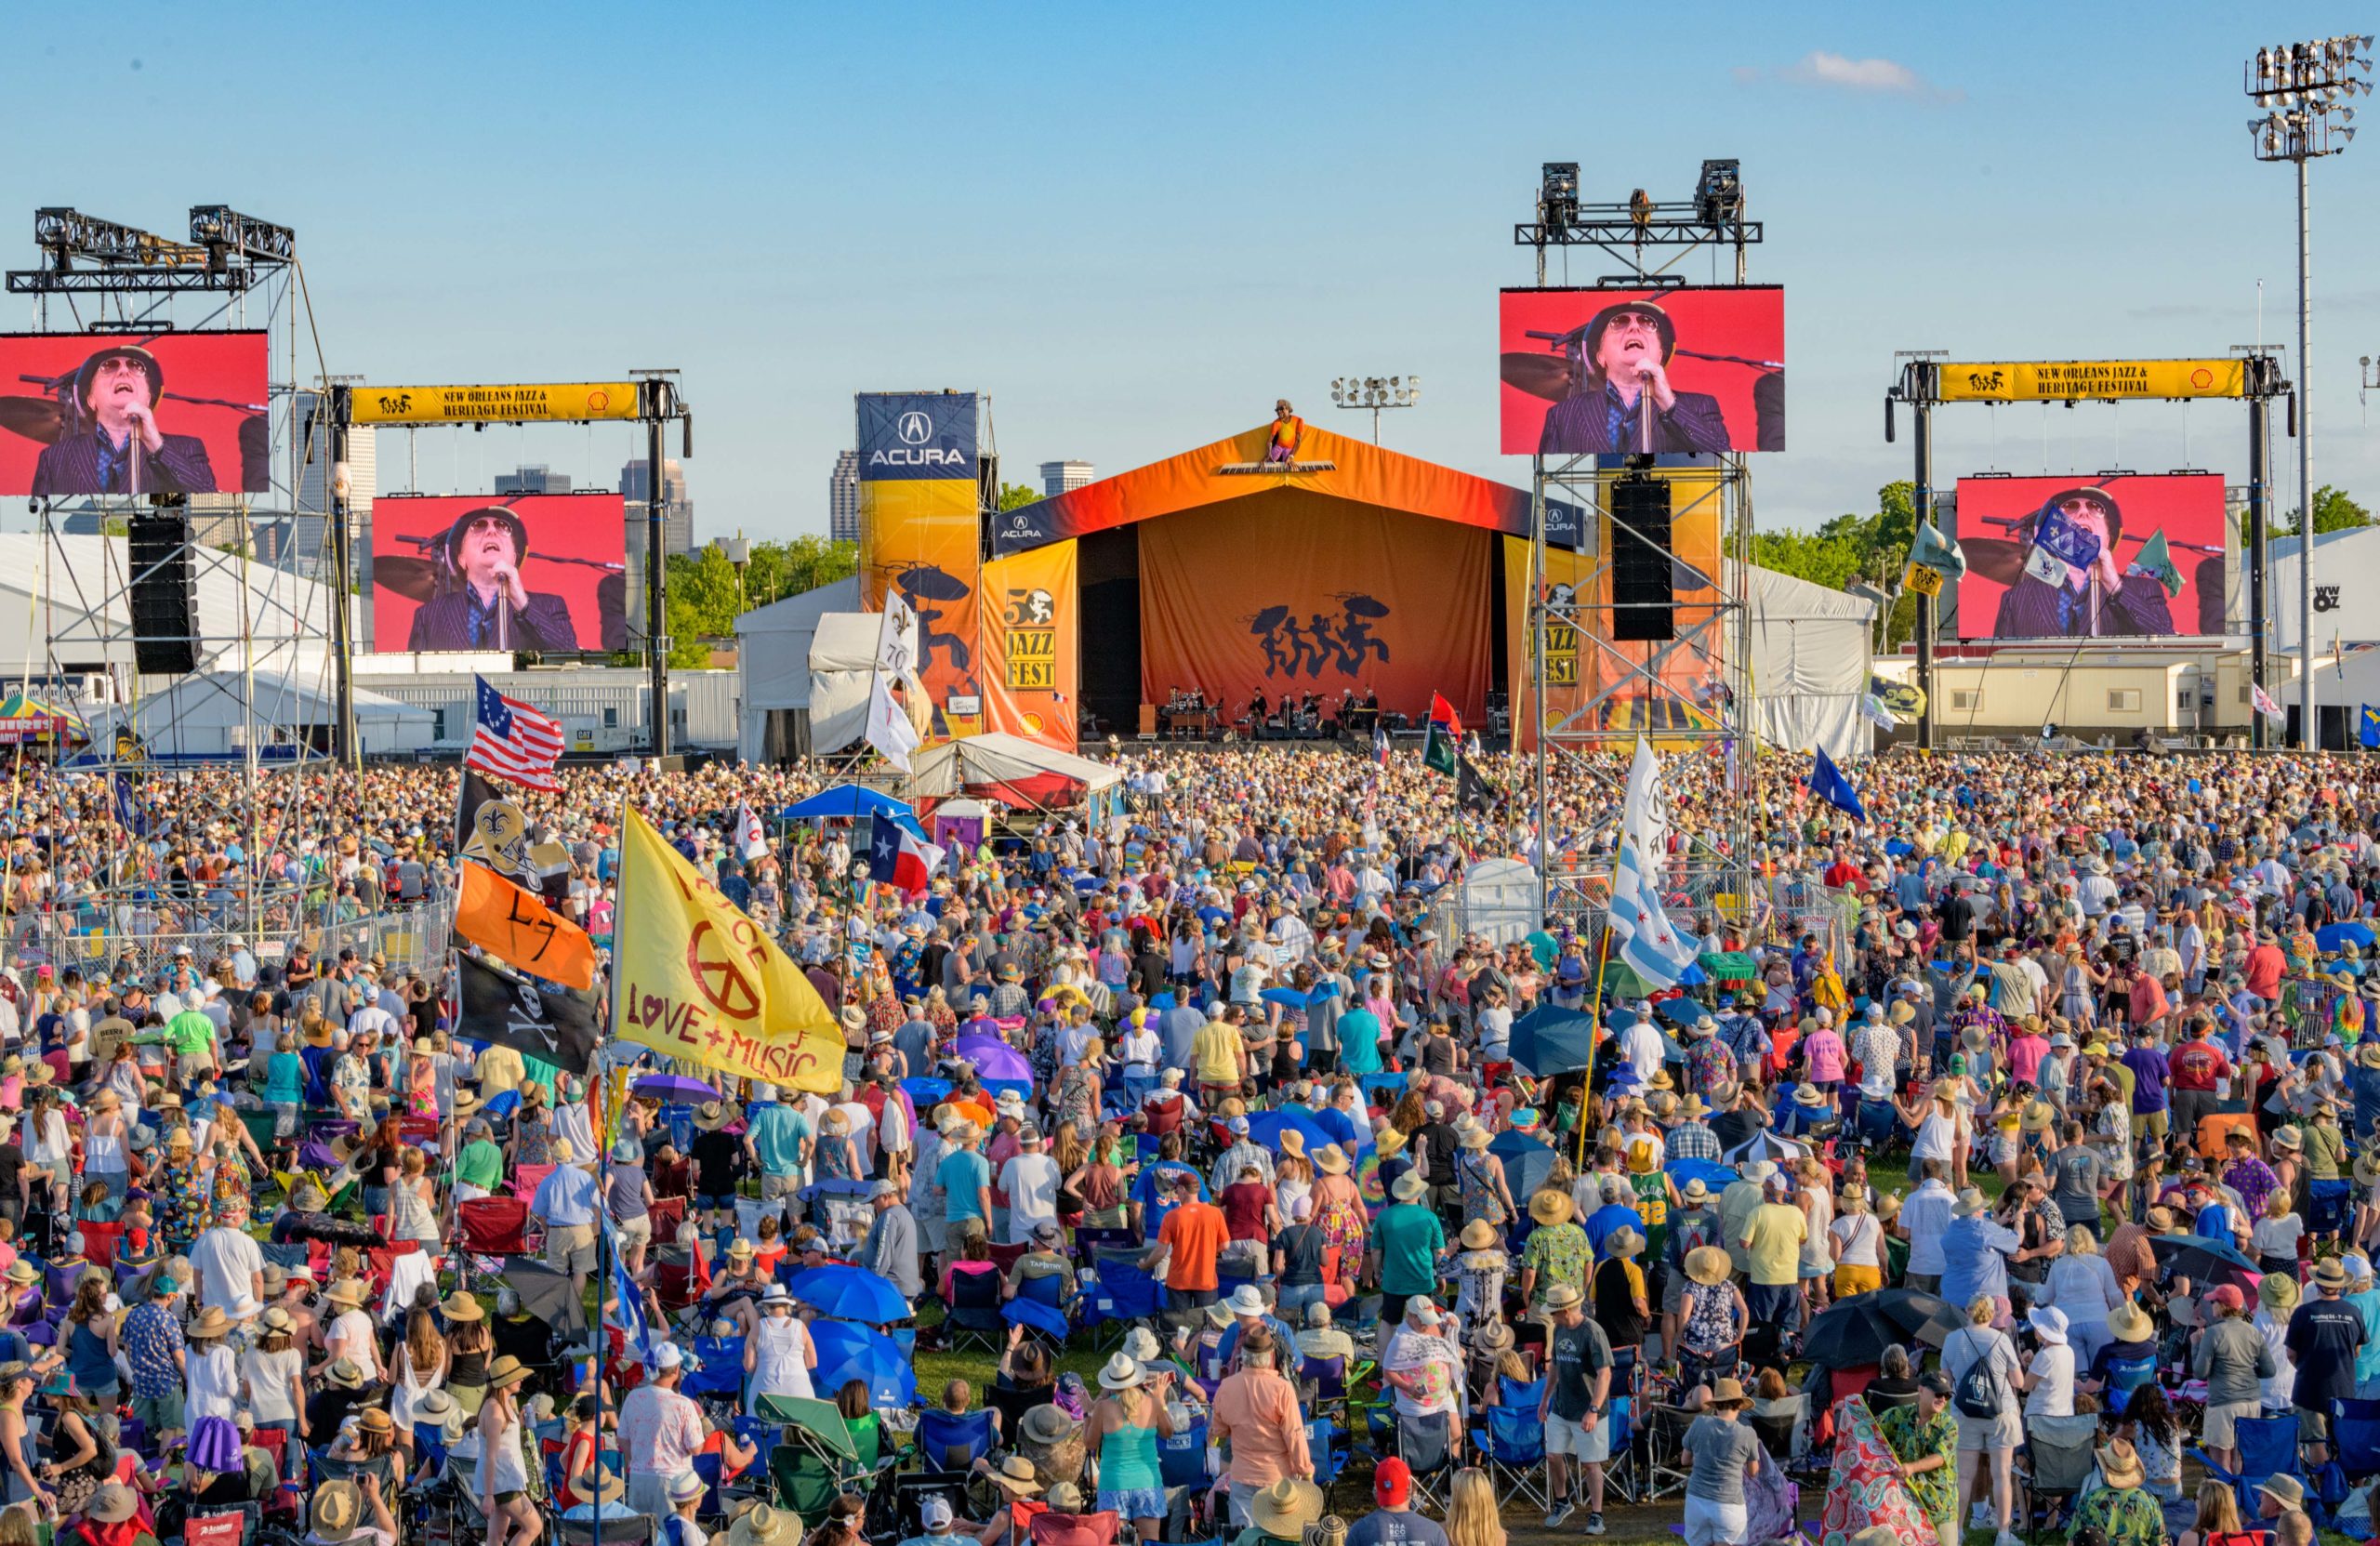 A crowd watches Van Morrison on the Acura Stage during the 50th New Orleans Jazz and Heritage Festival at the Fair Grounds in New Orleans, La. Sunday, April 28, 2019. Photo by Matthew Hinton